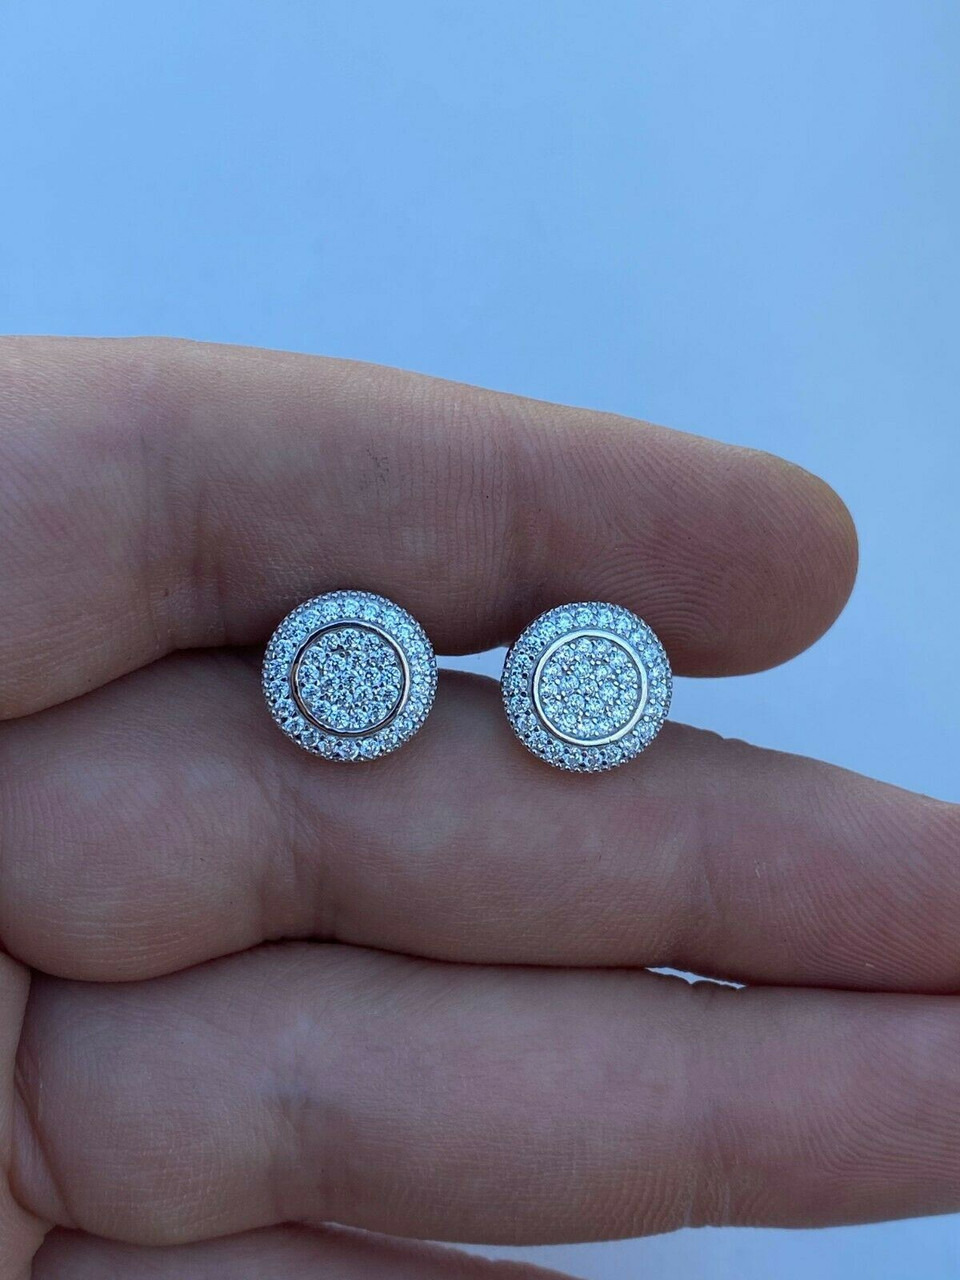 Real Solid 925 Silver Simulated Diamonds Mens Earrings Big Studs 14k Gold  Plated